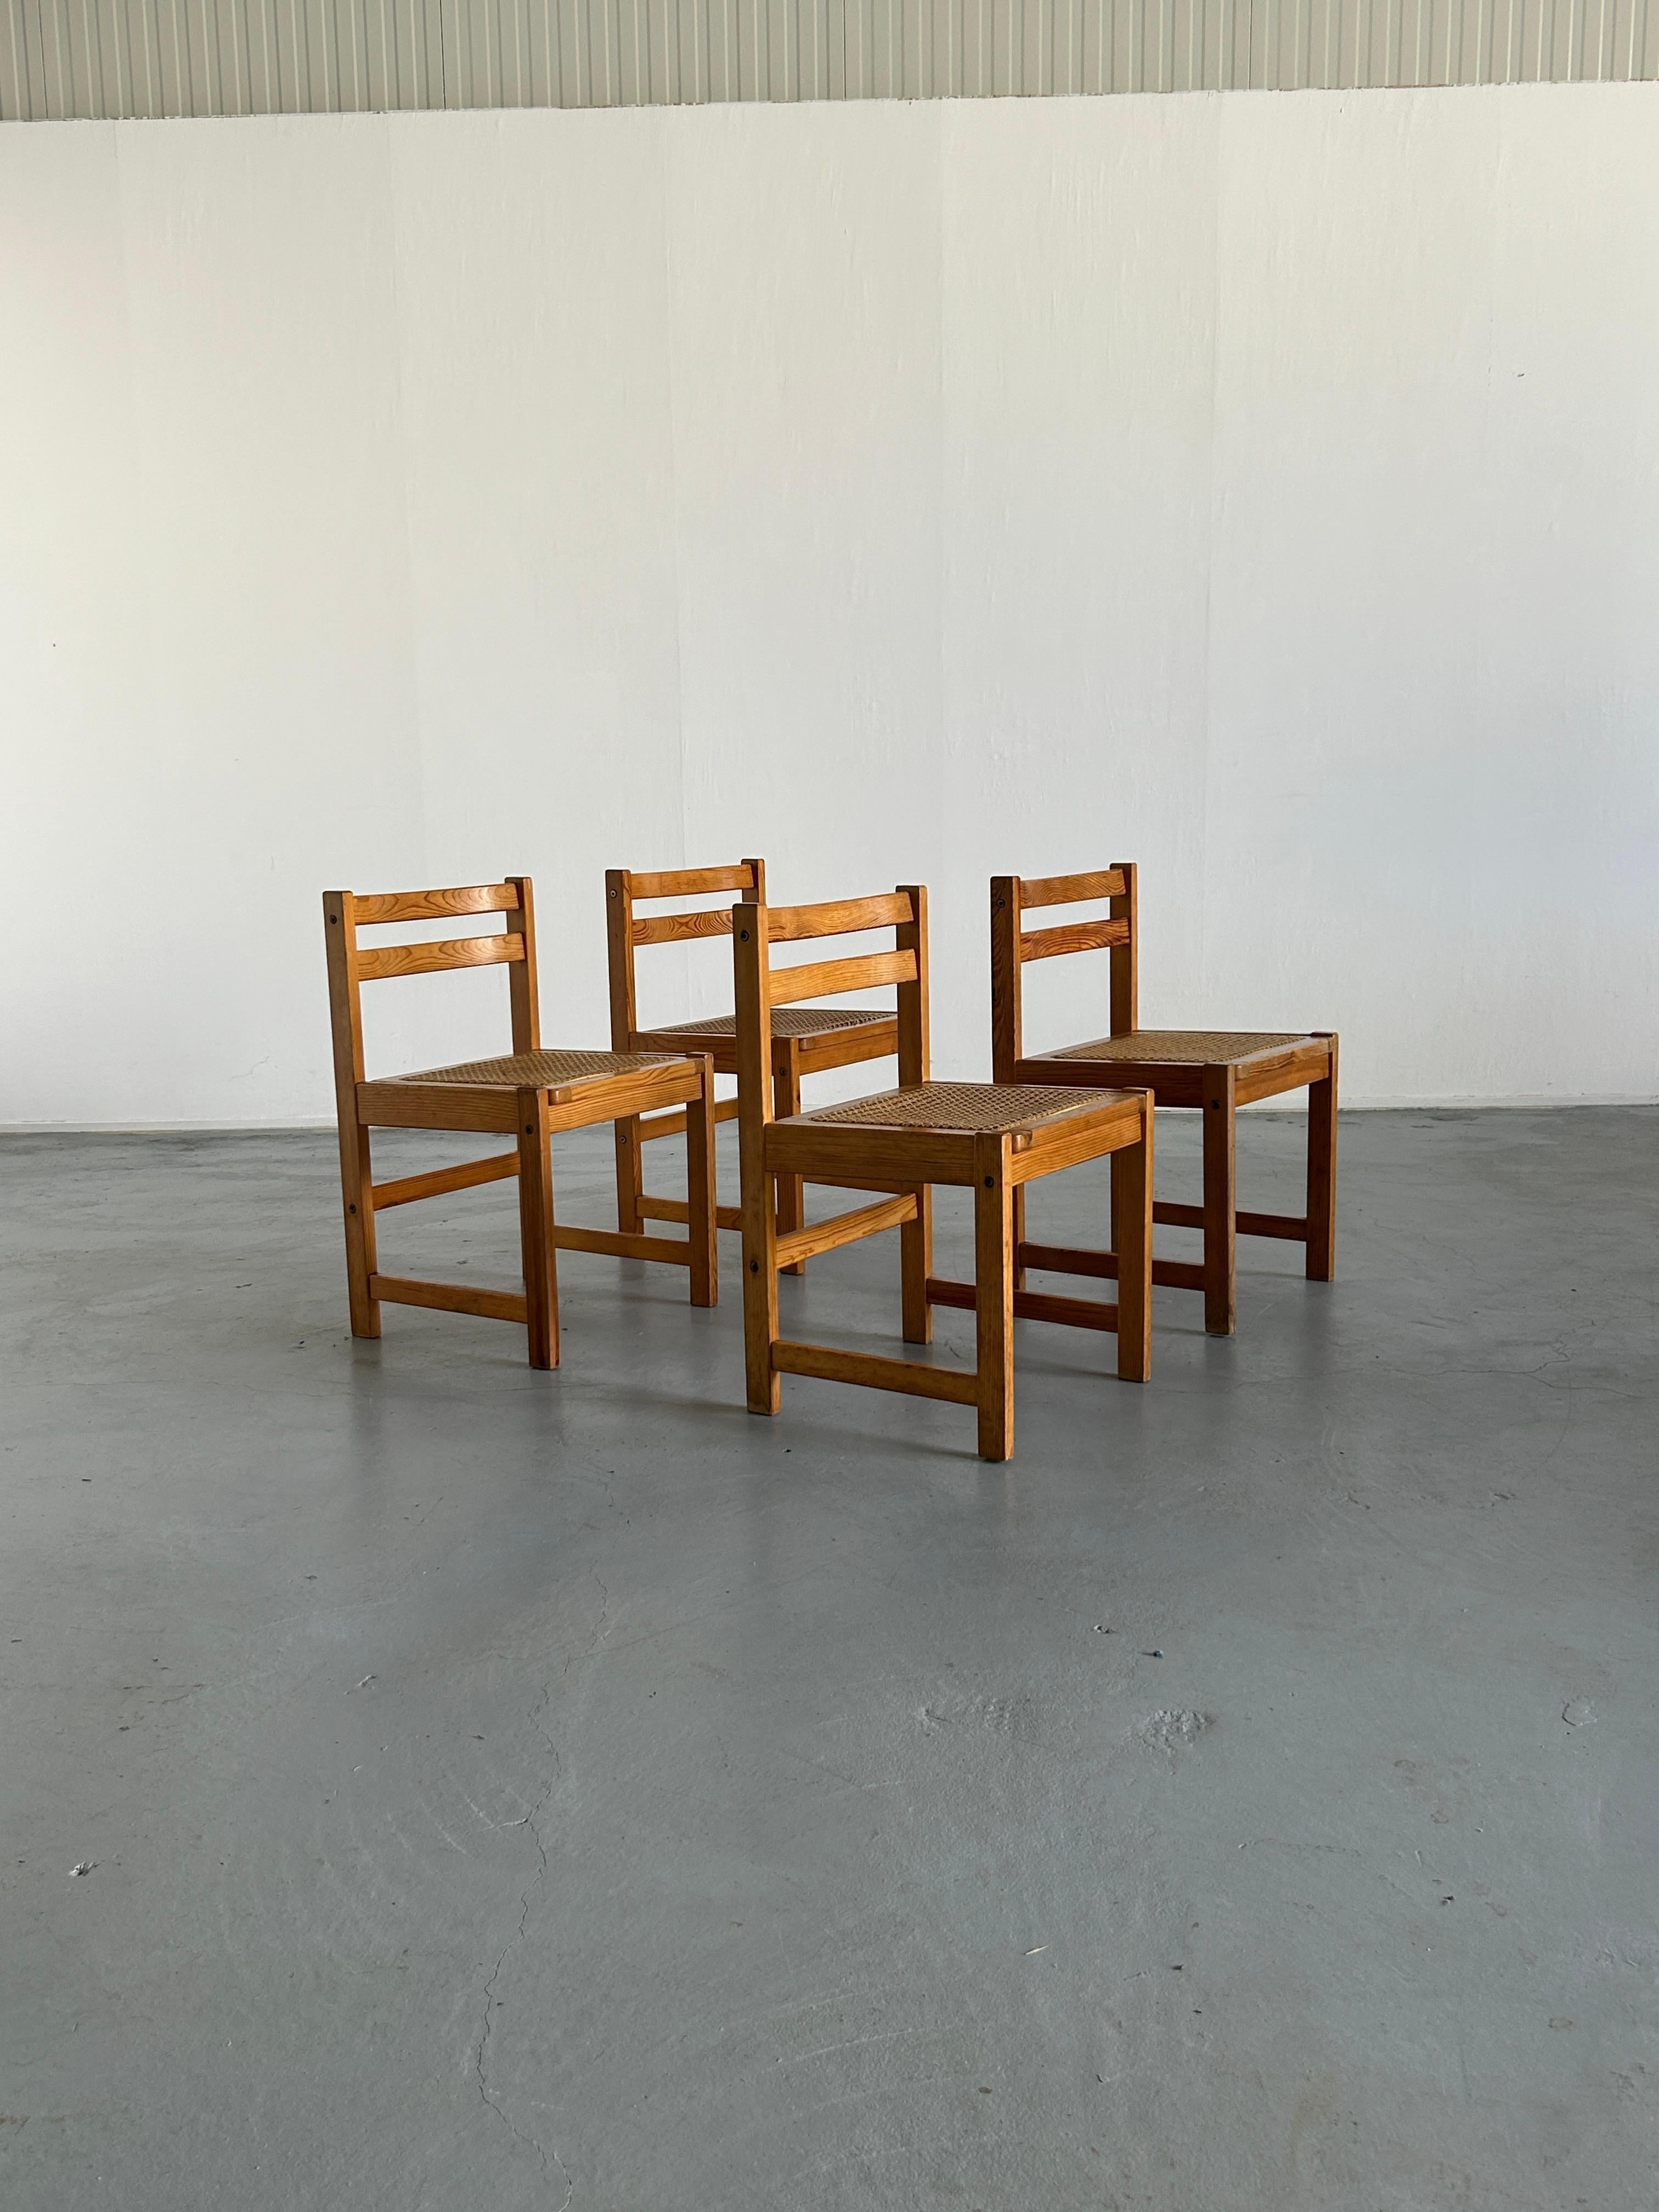 Mid-20th Century Set of 4 Vintage Mid-Century Modern Wooden Dining Chairs in Beech and Cane, 60s